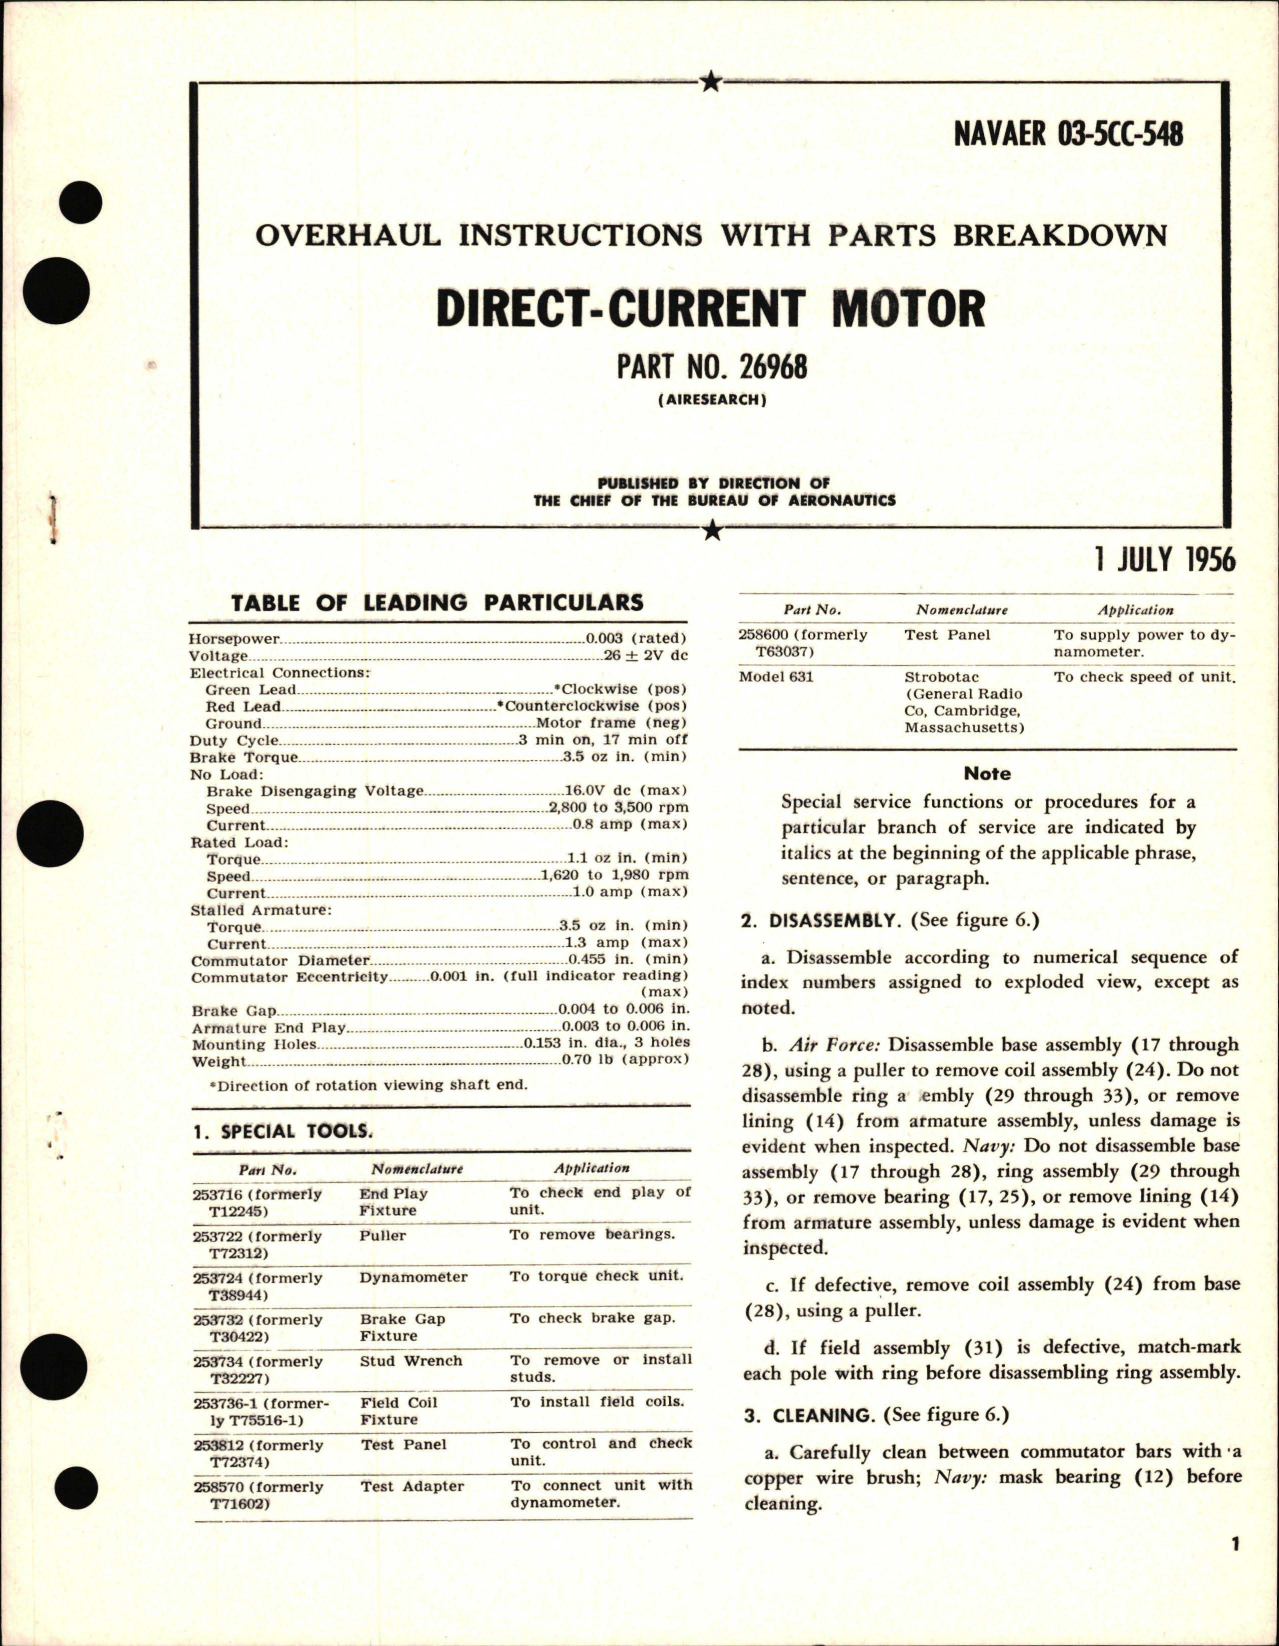 Sample page 1 from AirCorps Library document: Overhaul Instructions with Parts Breakdown for Direct Current Motor - Part 26968